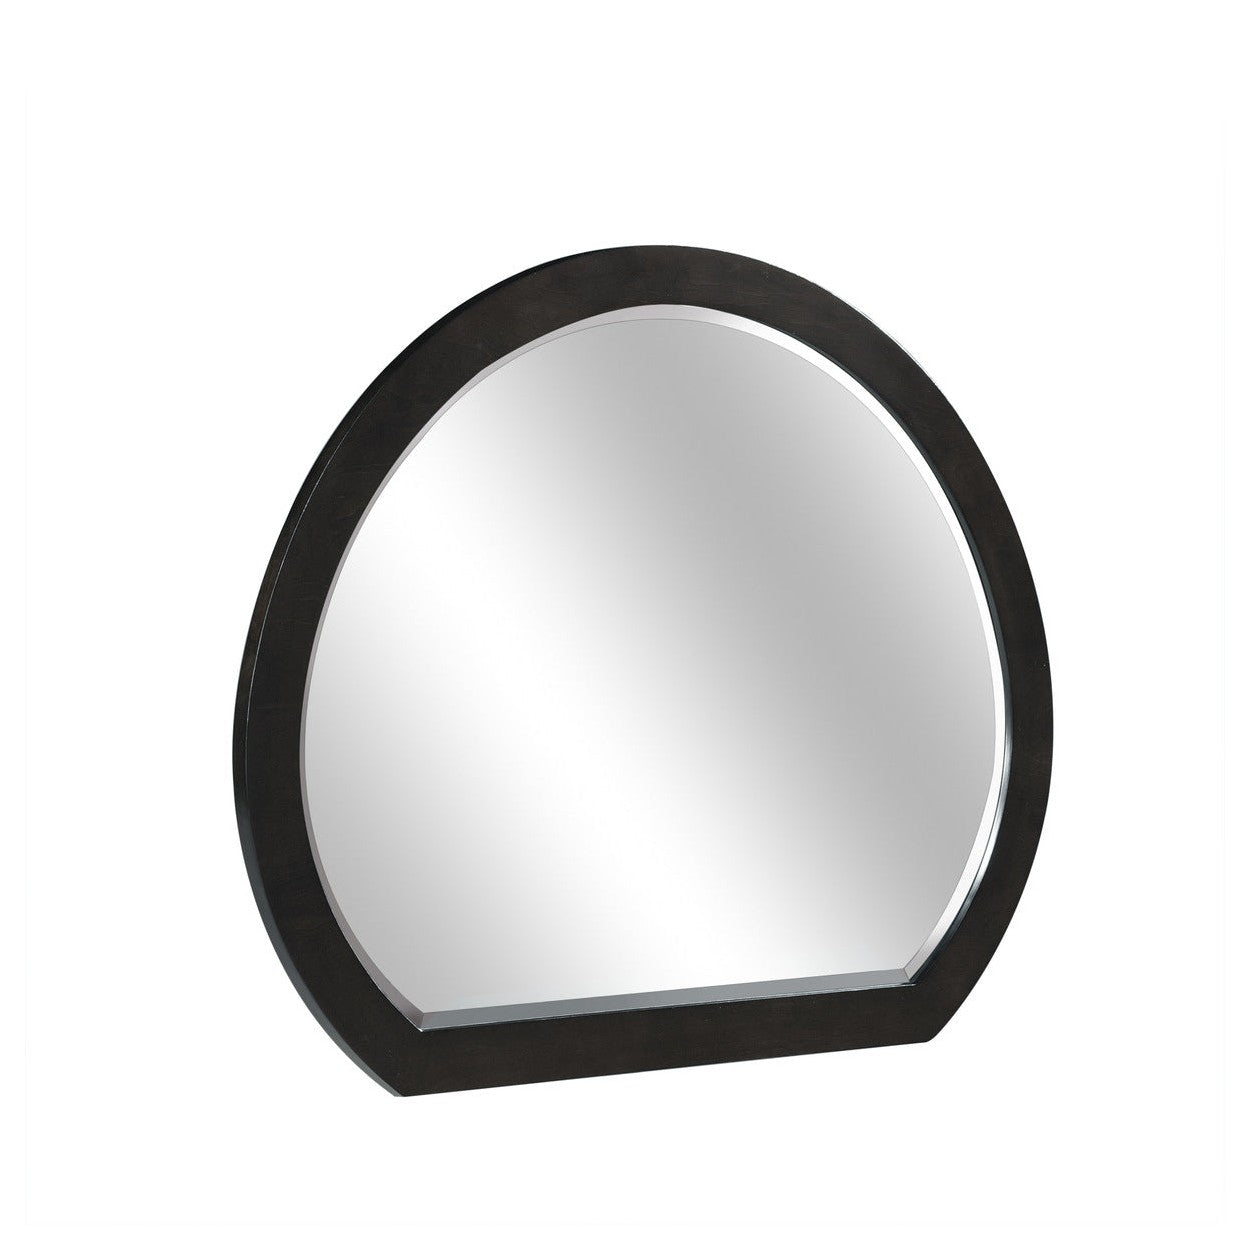 MIRROR 1737NGY-6